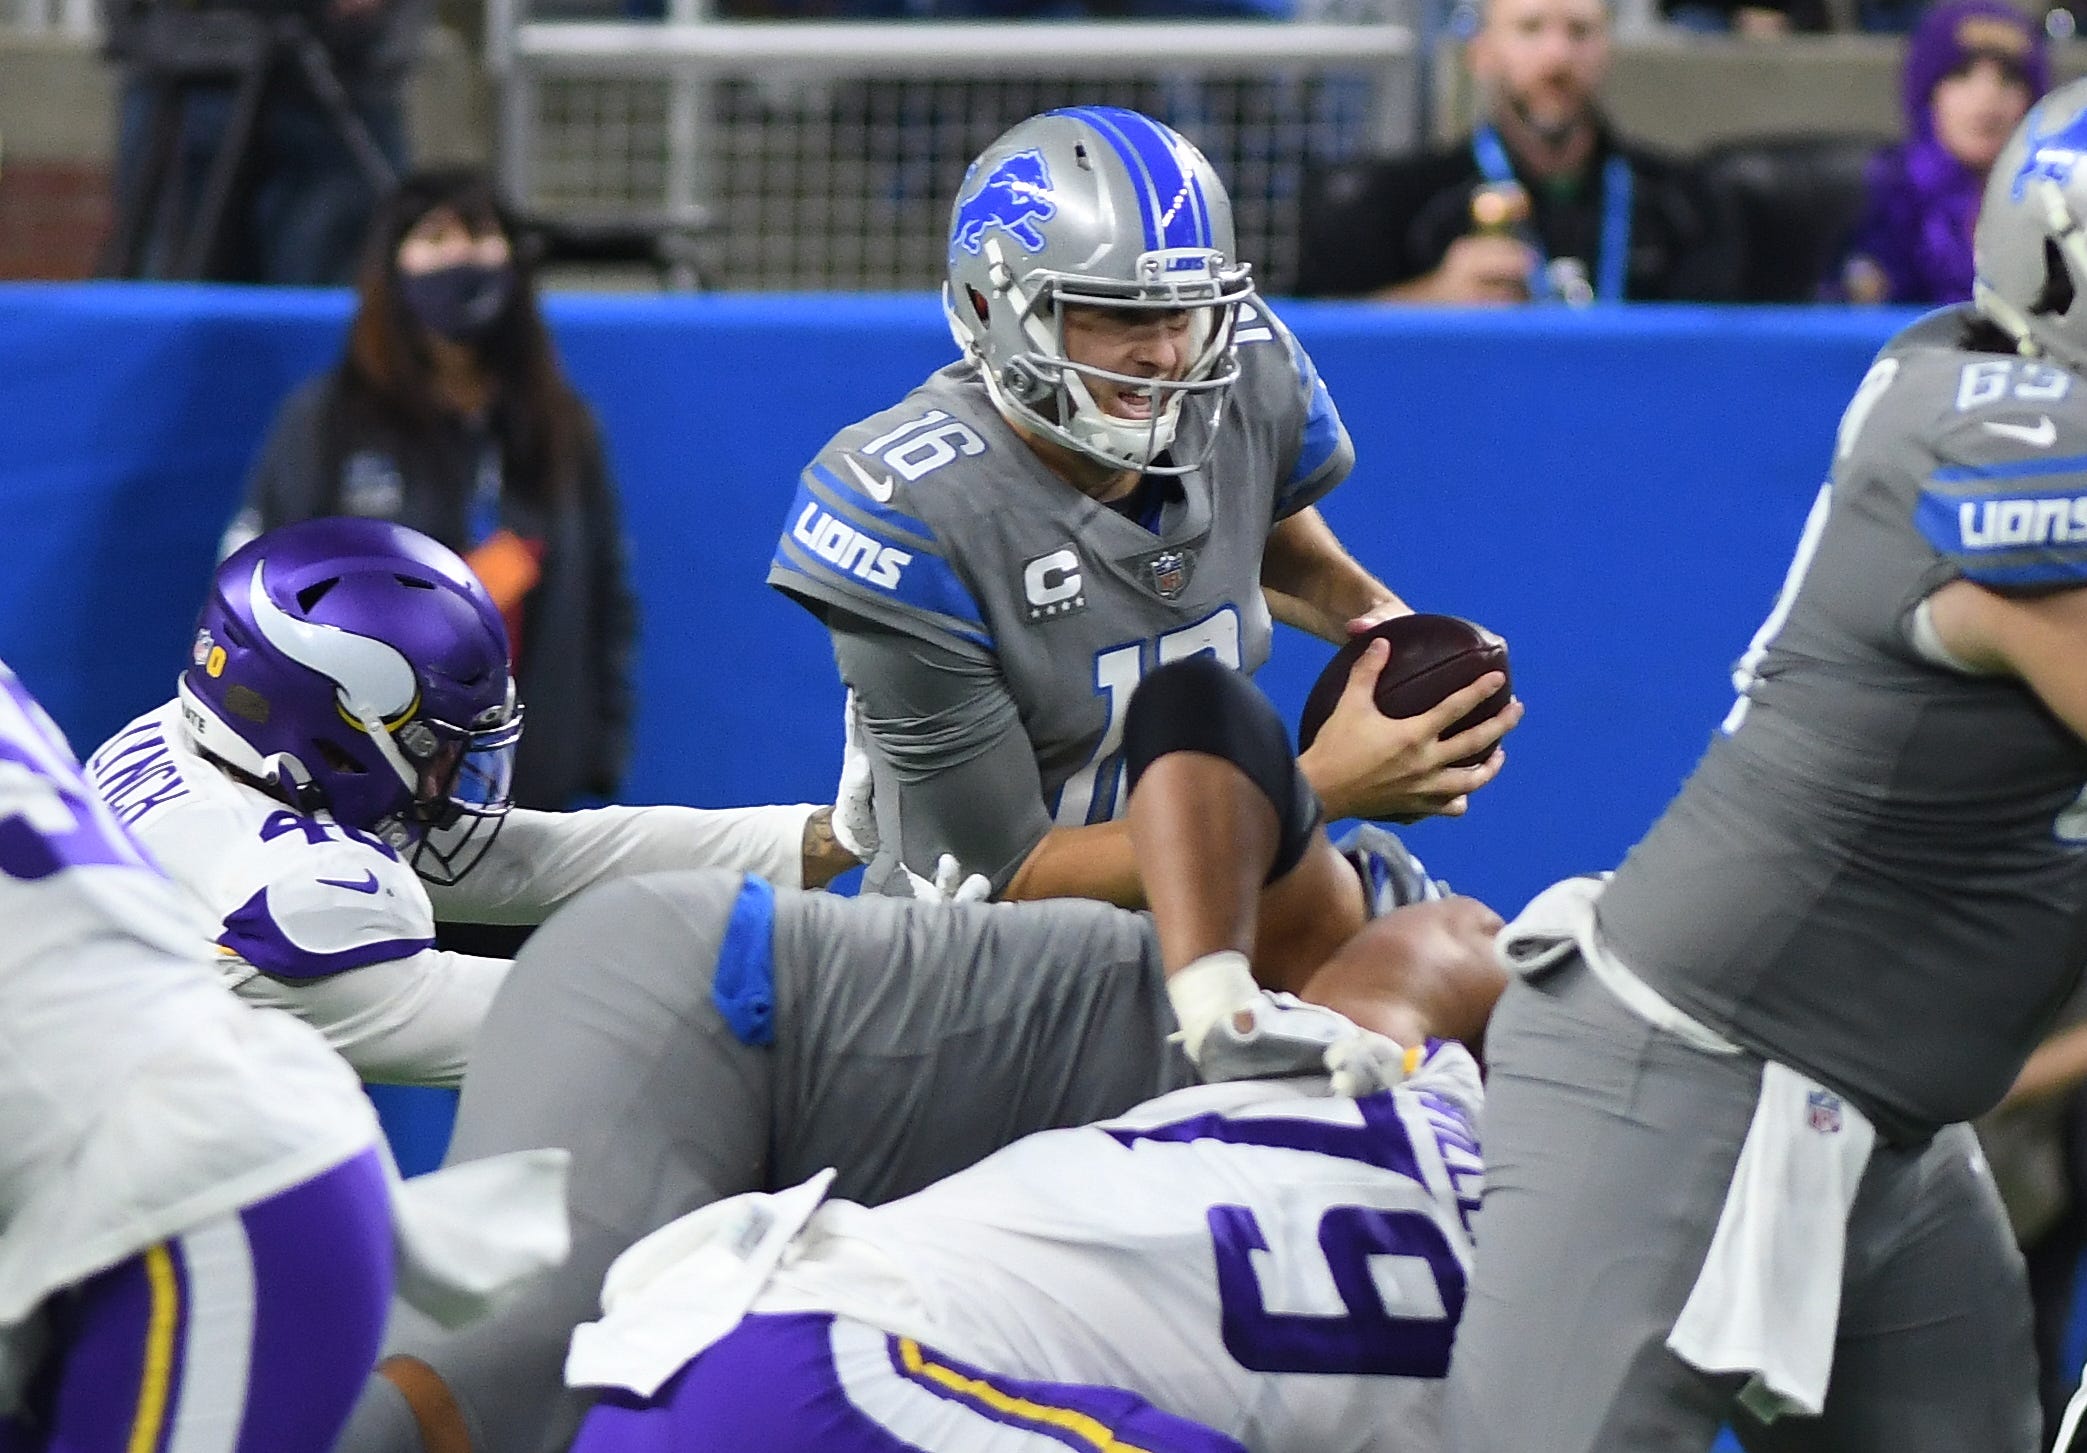 Lions quarterback Jared Goff is sacked by Vikings Blake Lynch in the third quarter.